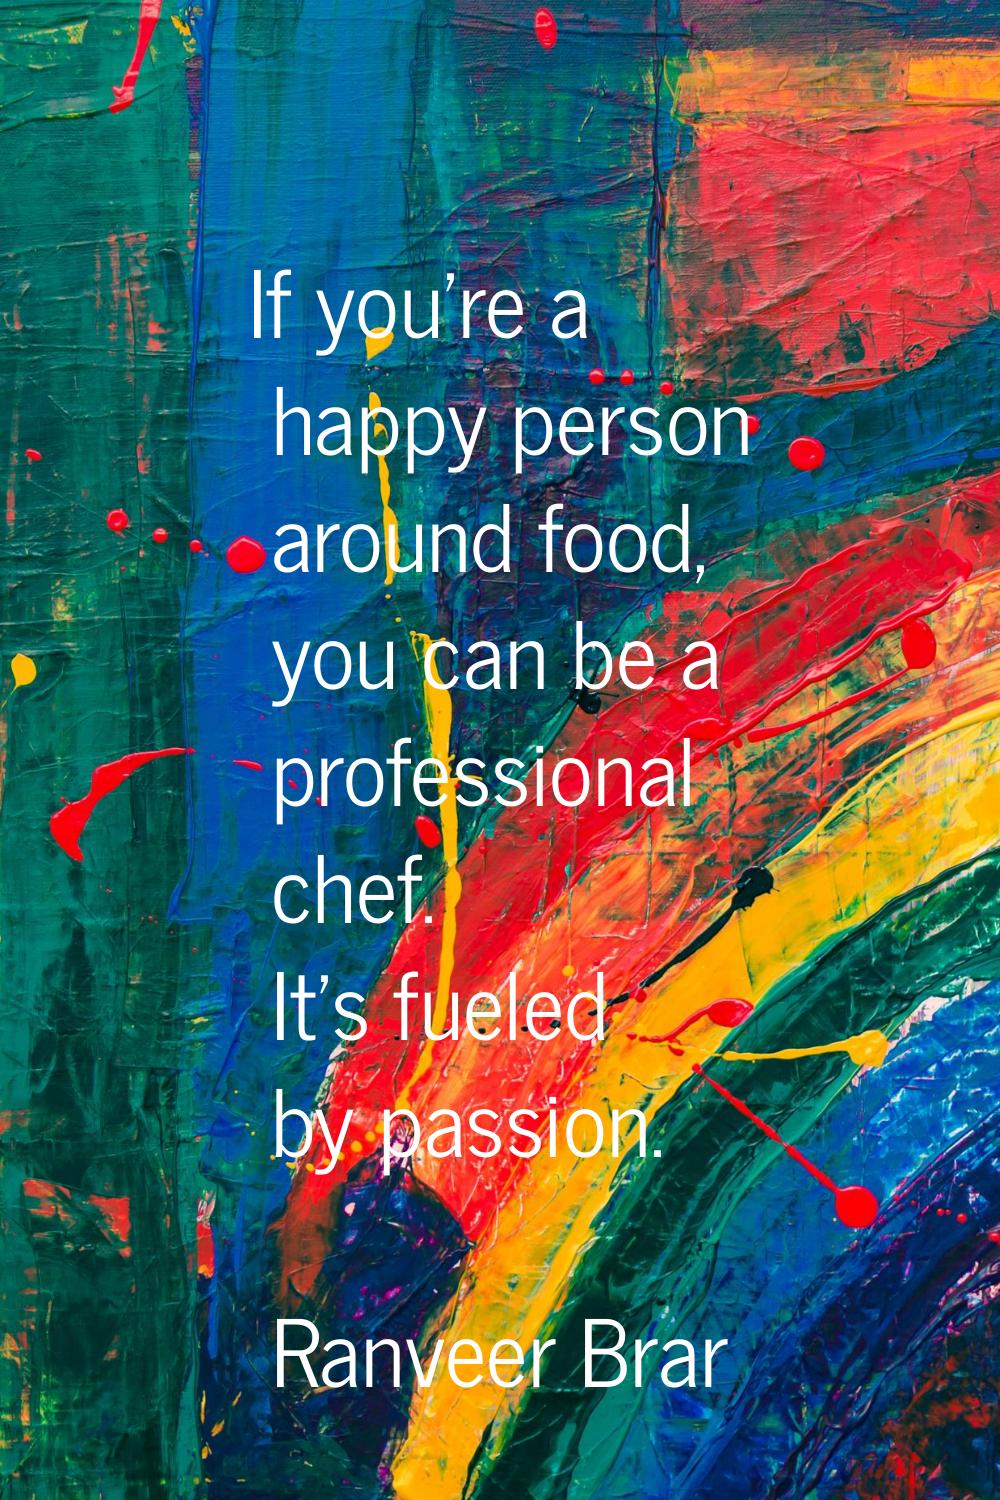 If you're a happy person around food, you can be a professional chef. It's fueled by passion.